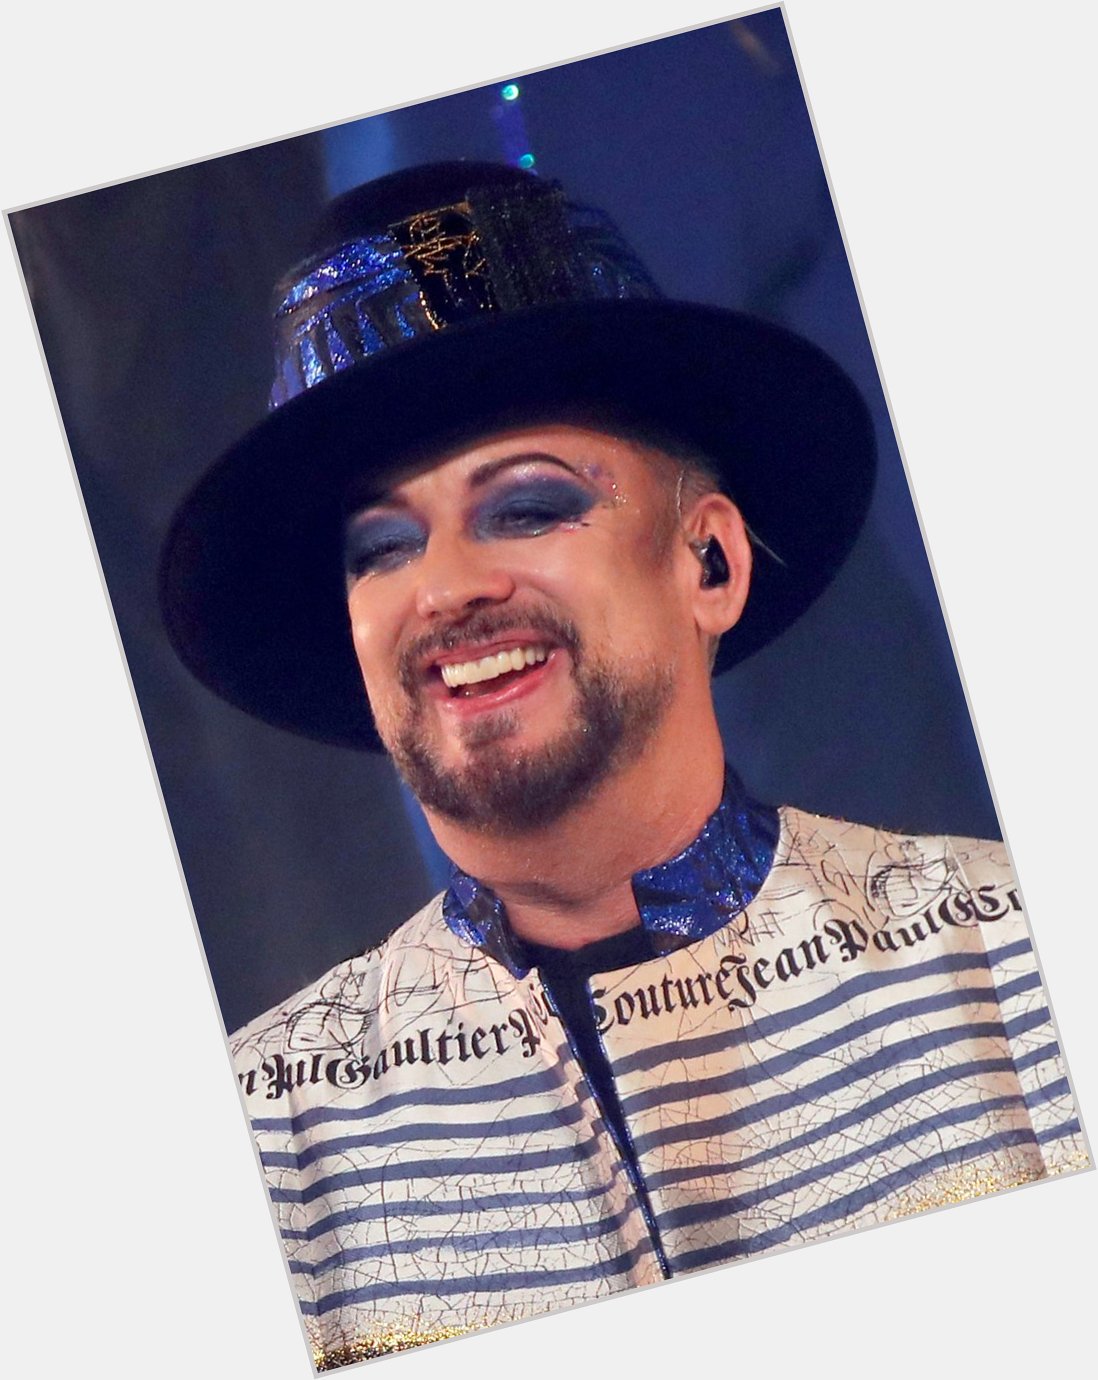 Huge happy birthday shoutout to the legendary Boy George of Culture Club! (Reuters) 